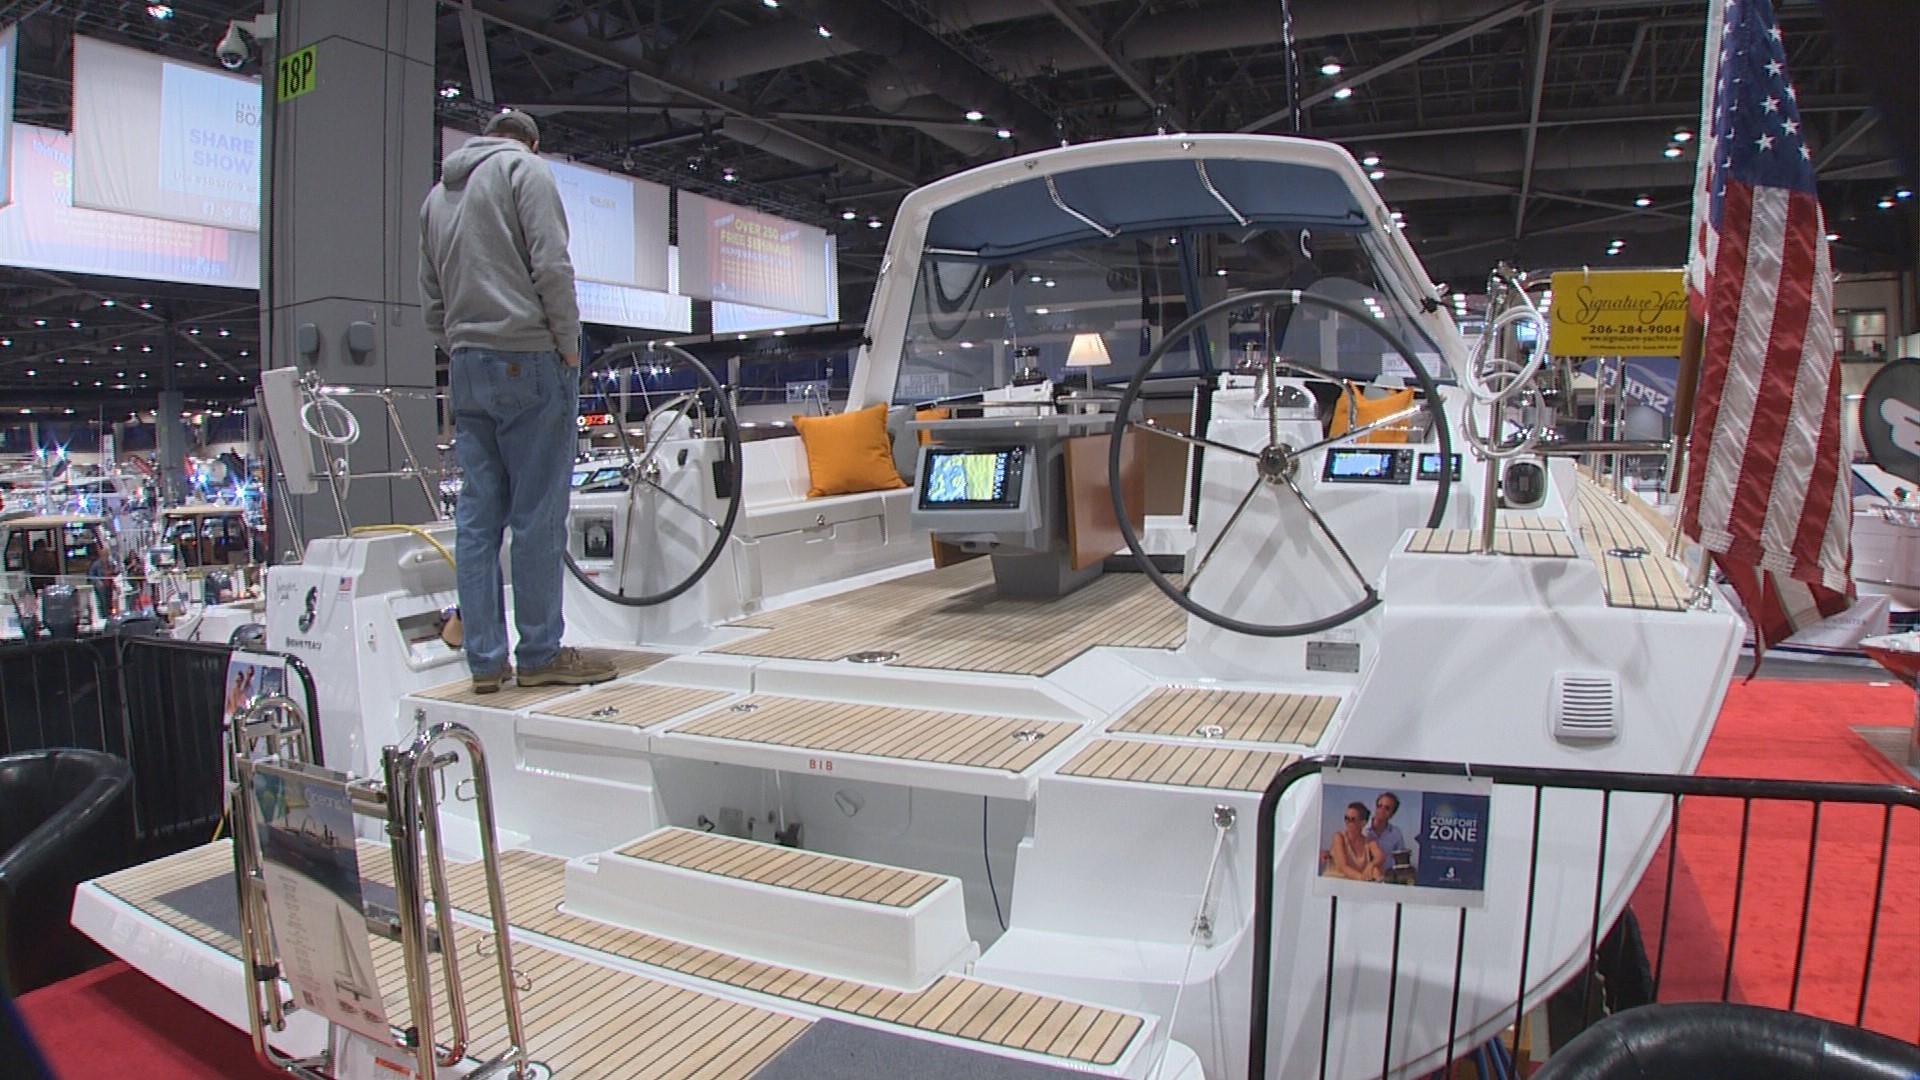 Set sail for the 2019 Seattle Boat show!